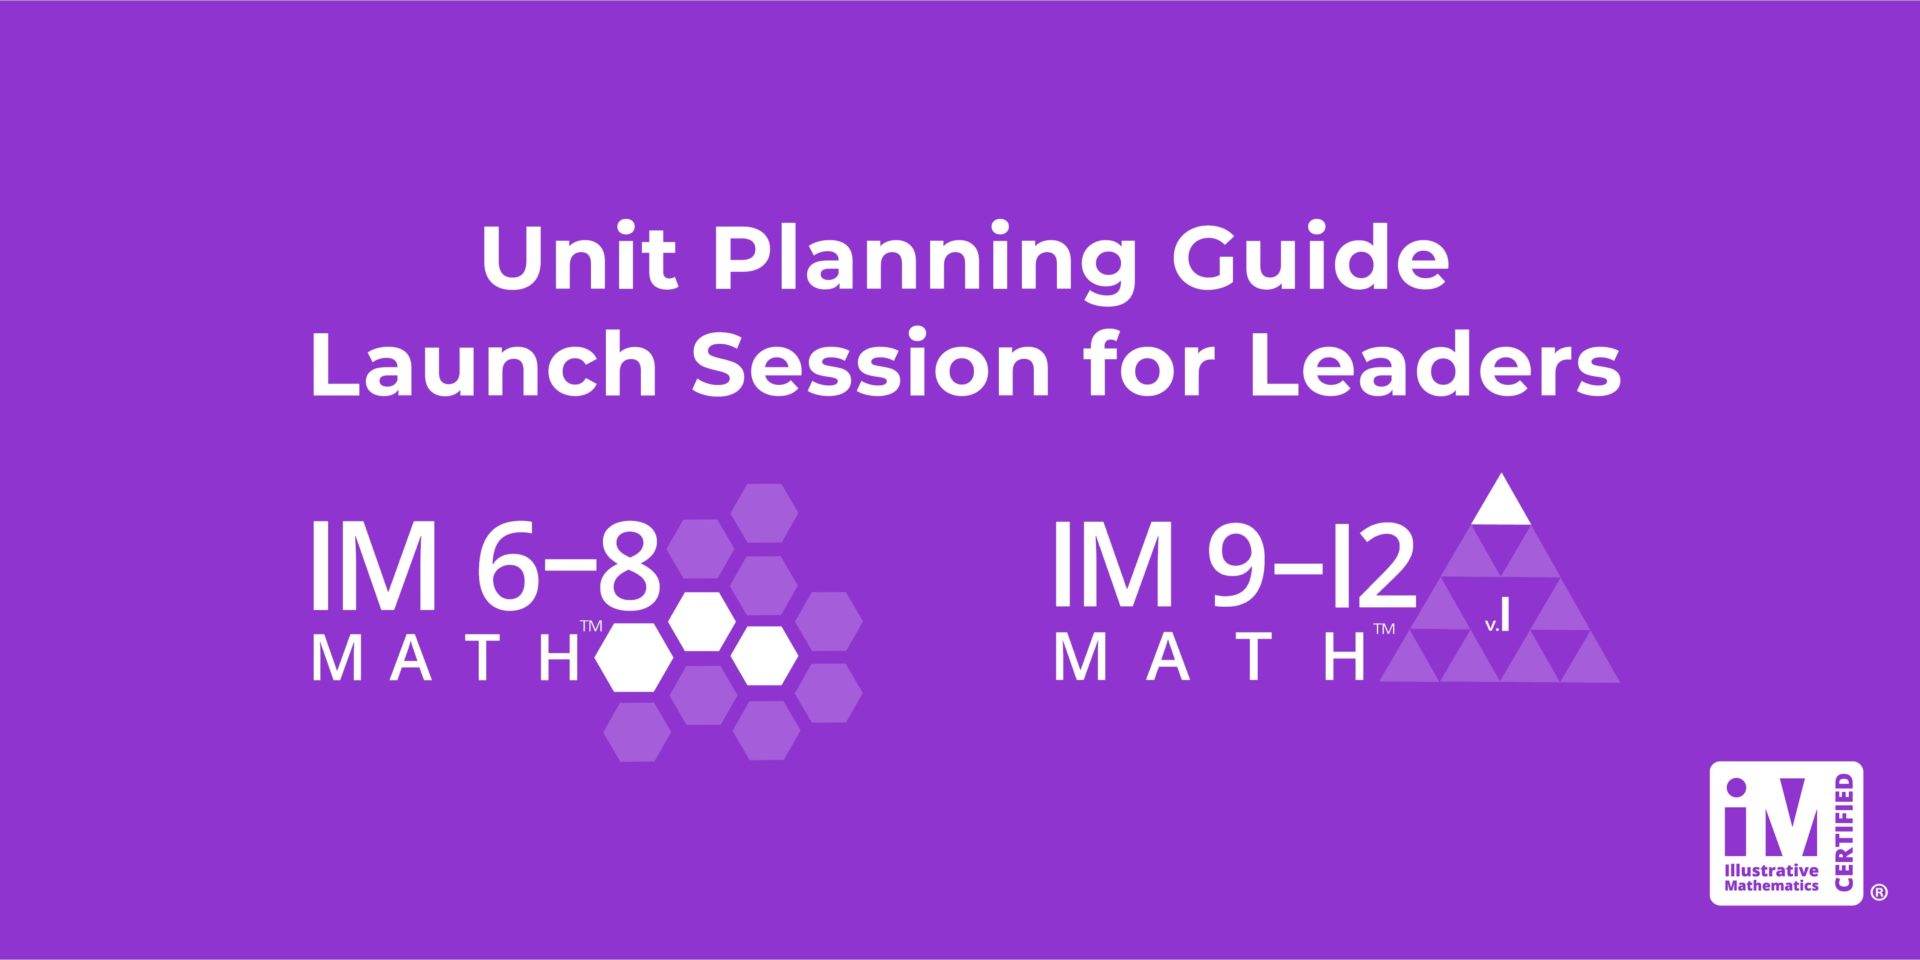 IM 6-12 Math: Unit Planning Guide Launch Session for Leaders